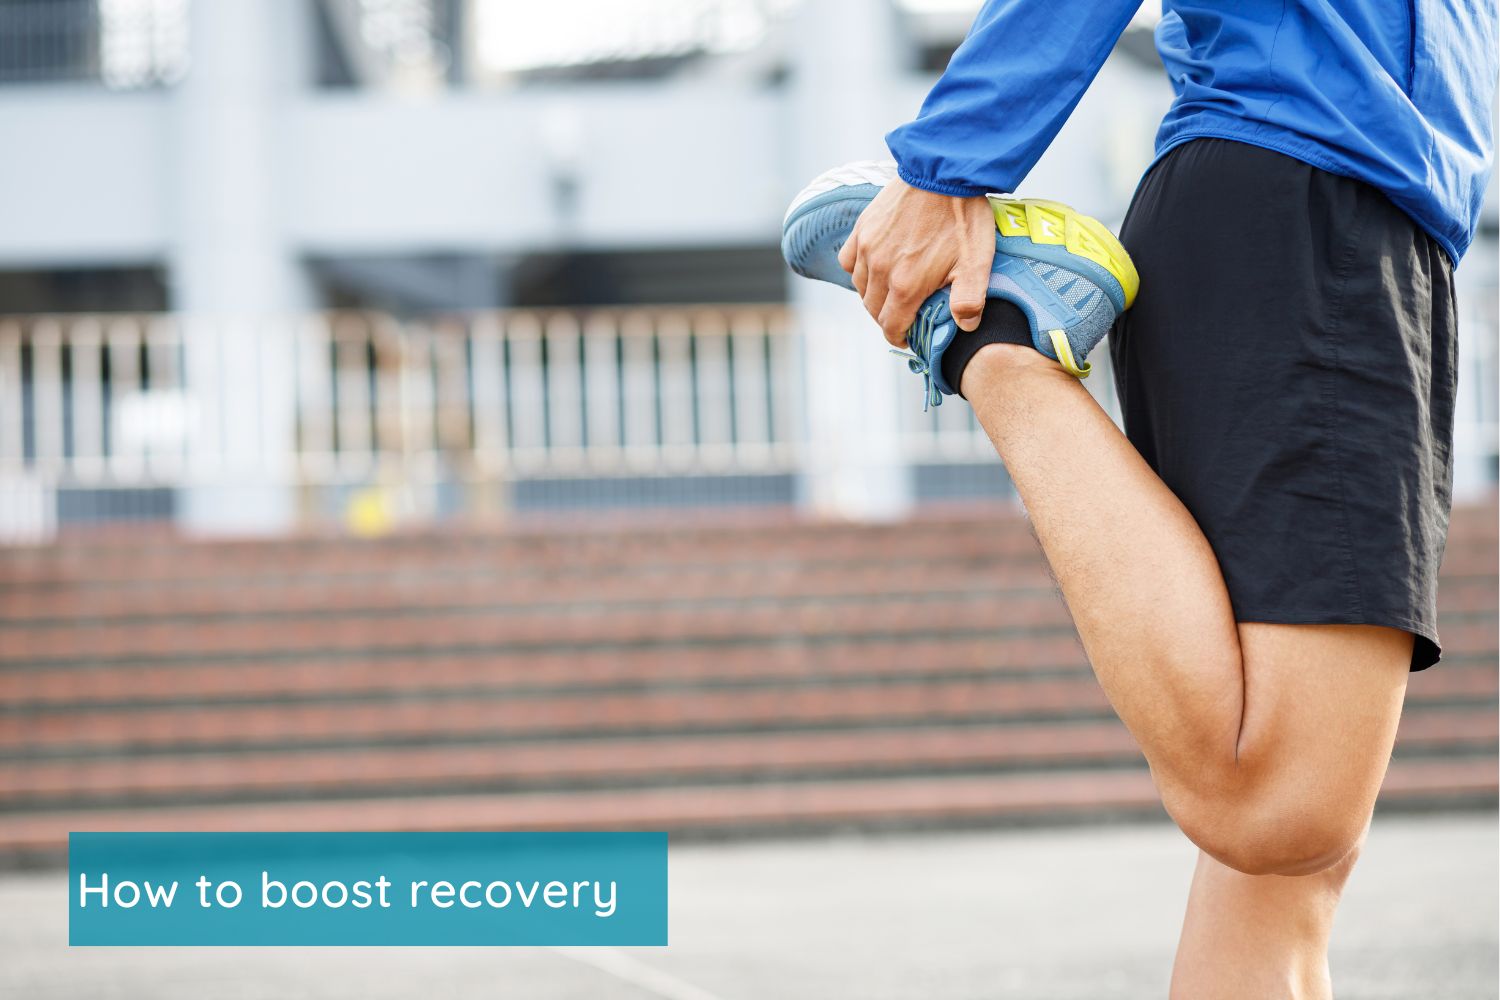 How to boost recovery after exercise